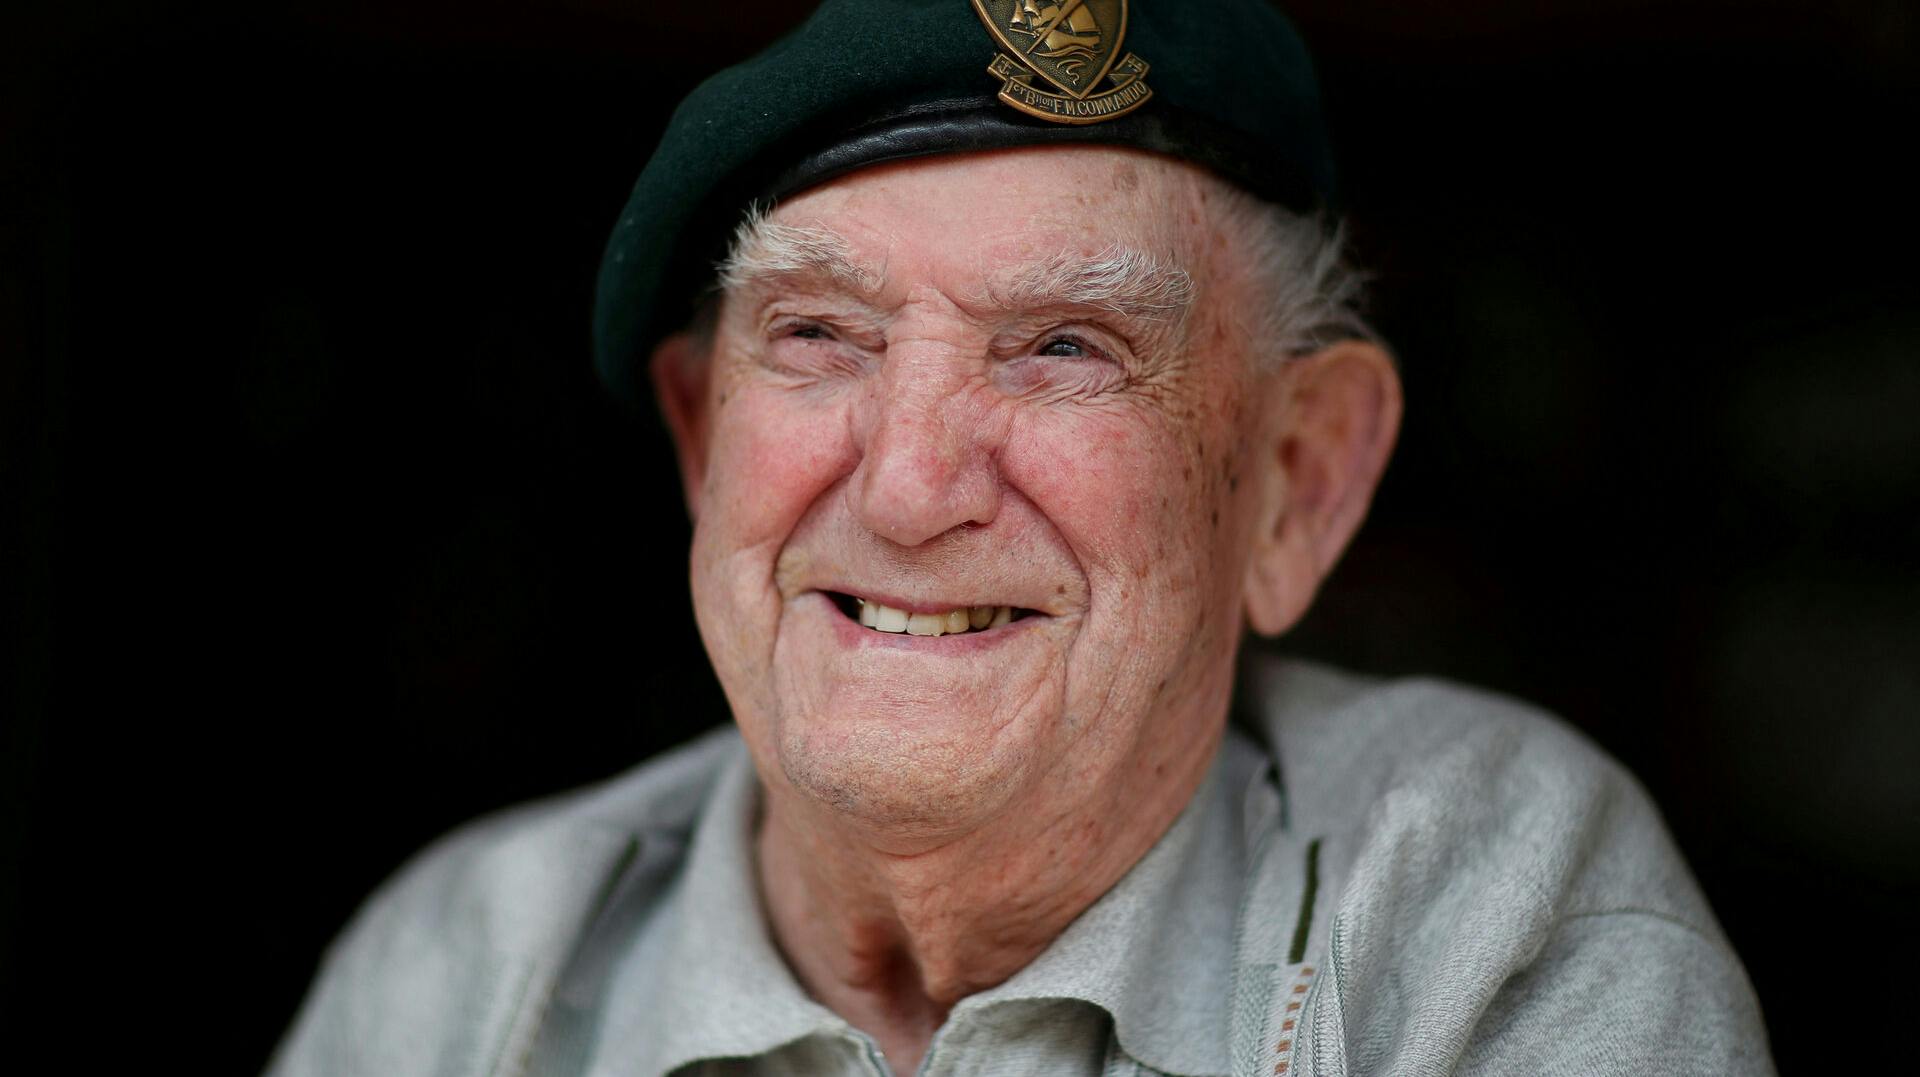 FILE PHOTO: Former member of French Captain Philippe Kieffer's green berets commando Leon Gautier, 96 years old, attends an interview with Reuters in Ouistreham, France, May 13, 2019. Picture taken May 13, 2019. REUTERS/Christian Hartmann/File Photo